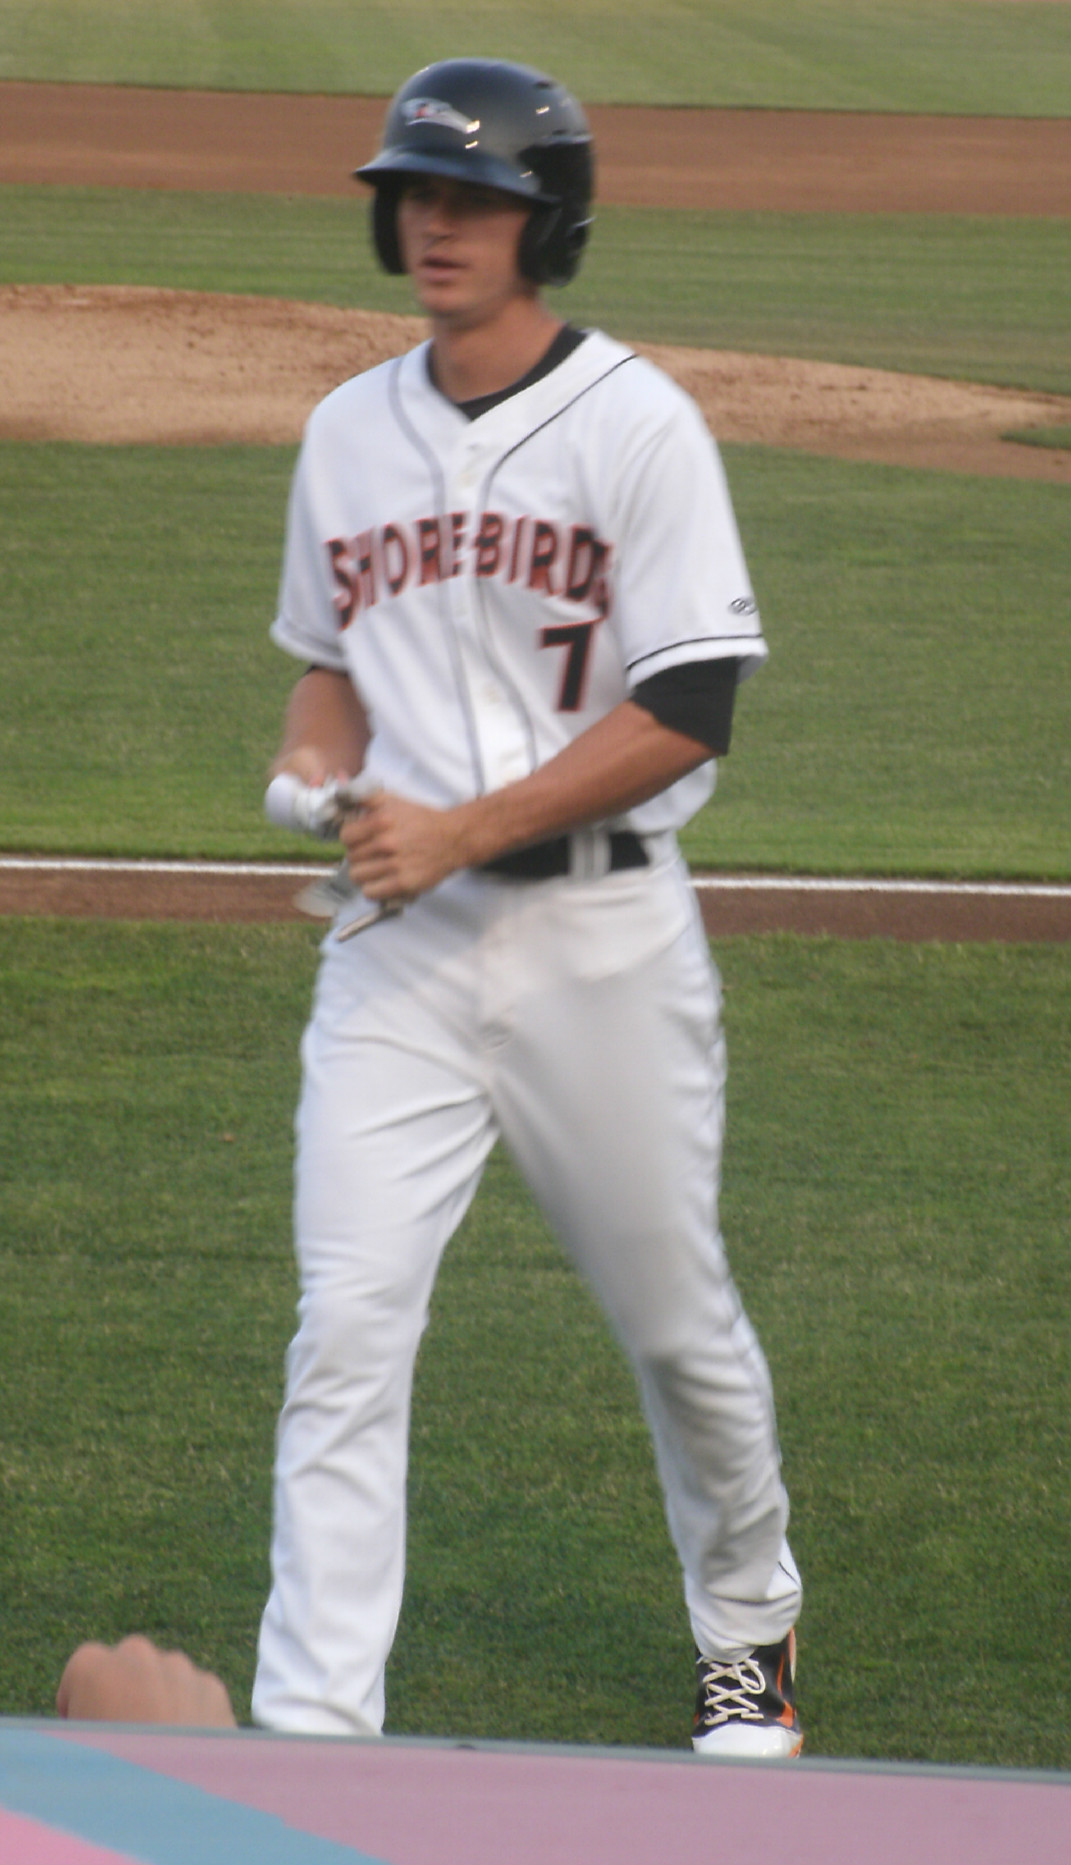 Mikey Planeta has solidfied center field for the Shorebirds since being added to the roster in May.